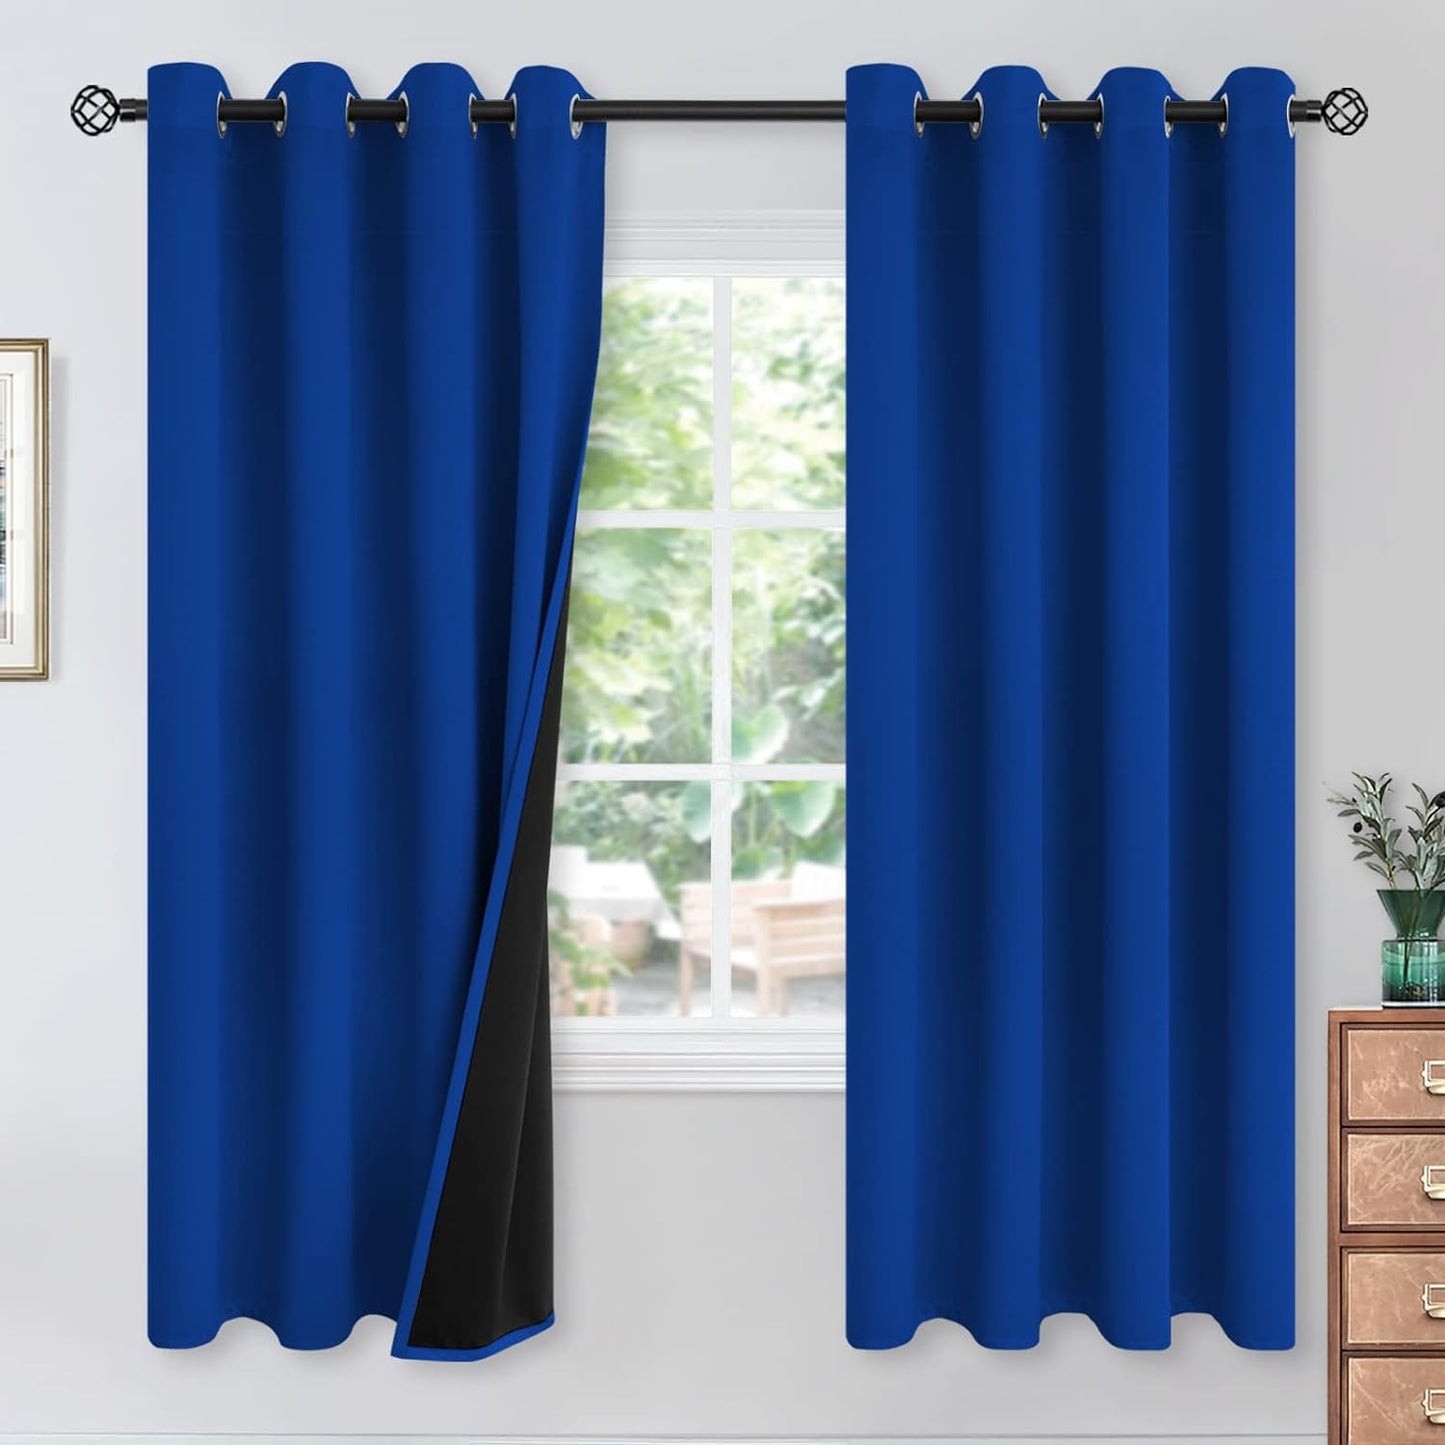 Youngstex Black 100% Blackout Curtains 63 Inches for Bedroom Thermal Insulated Total Room Darkening Curtains for Living Room Window with Black Back Grommet, 2 Panels, 42 X 63 Inch  YoungsTex Royal Blue 52W X 72L 